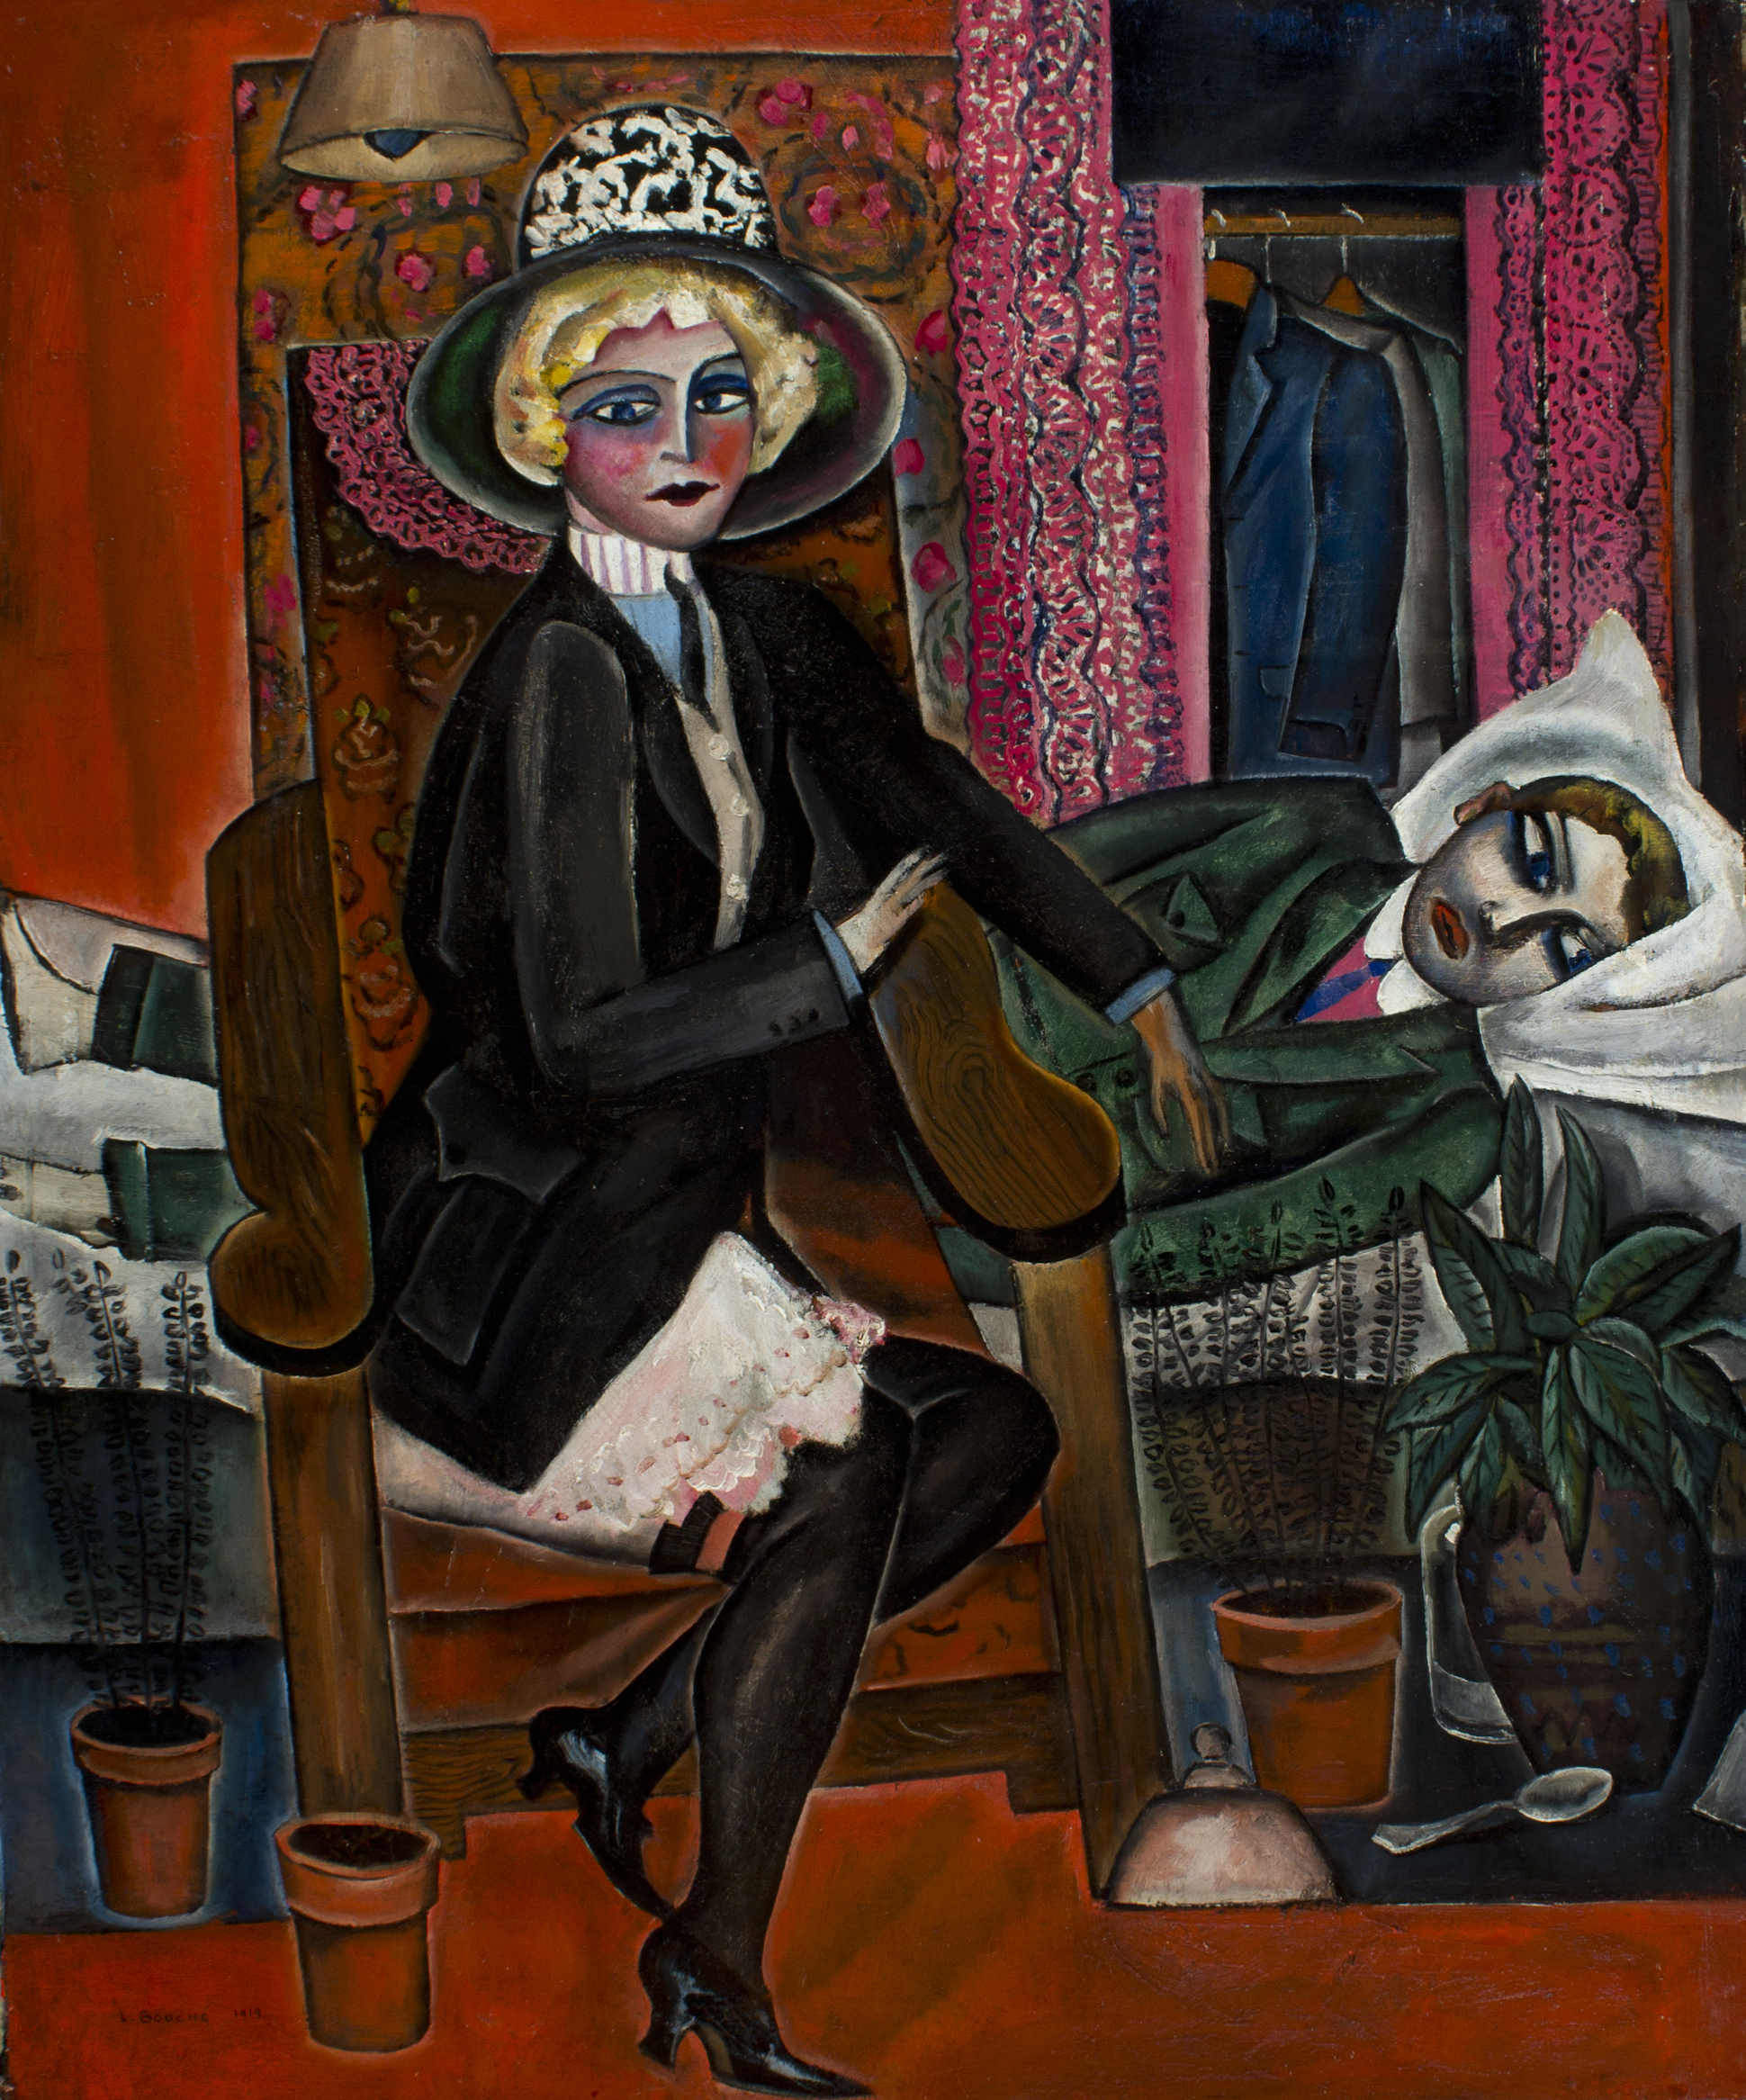 Painting of a woman lying in bed and a woman (in a hat) sitting in a chair next to the bed. Red and pink background.